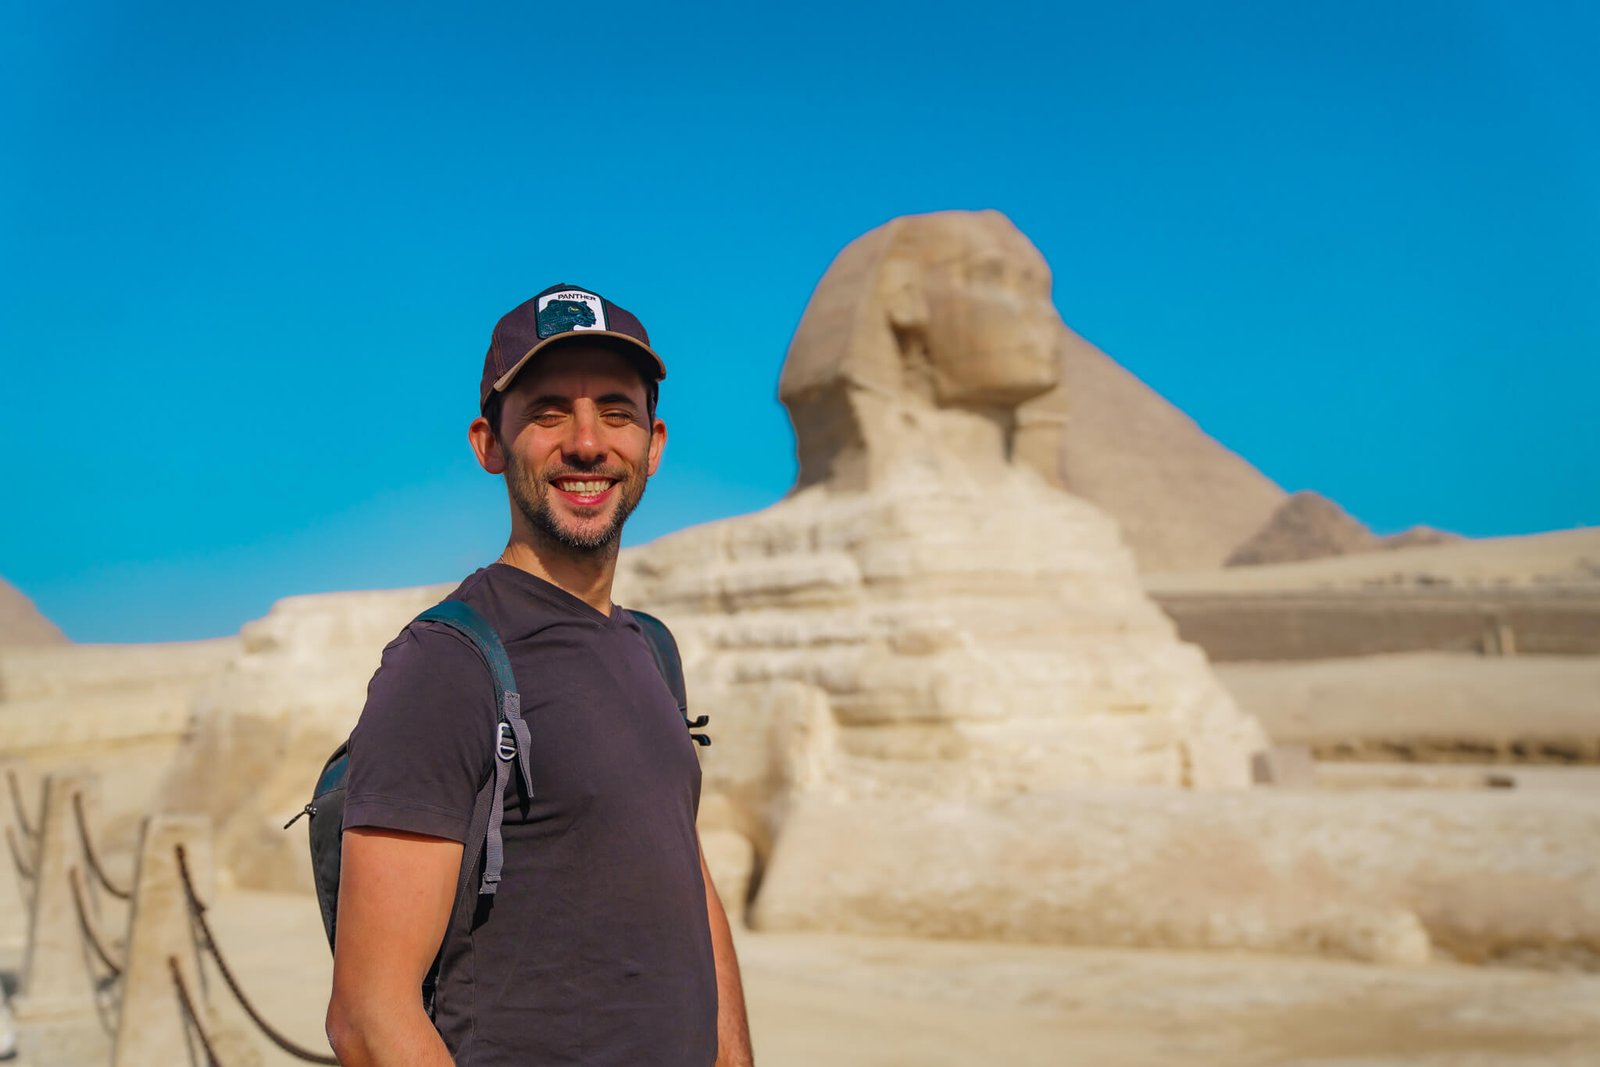 Fede next to the Sphinx, spots for the best photos at the Egyptian Pyramids